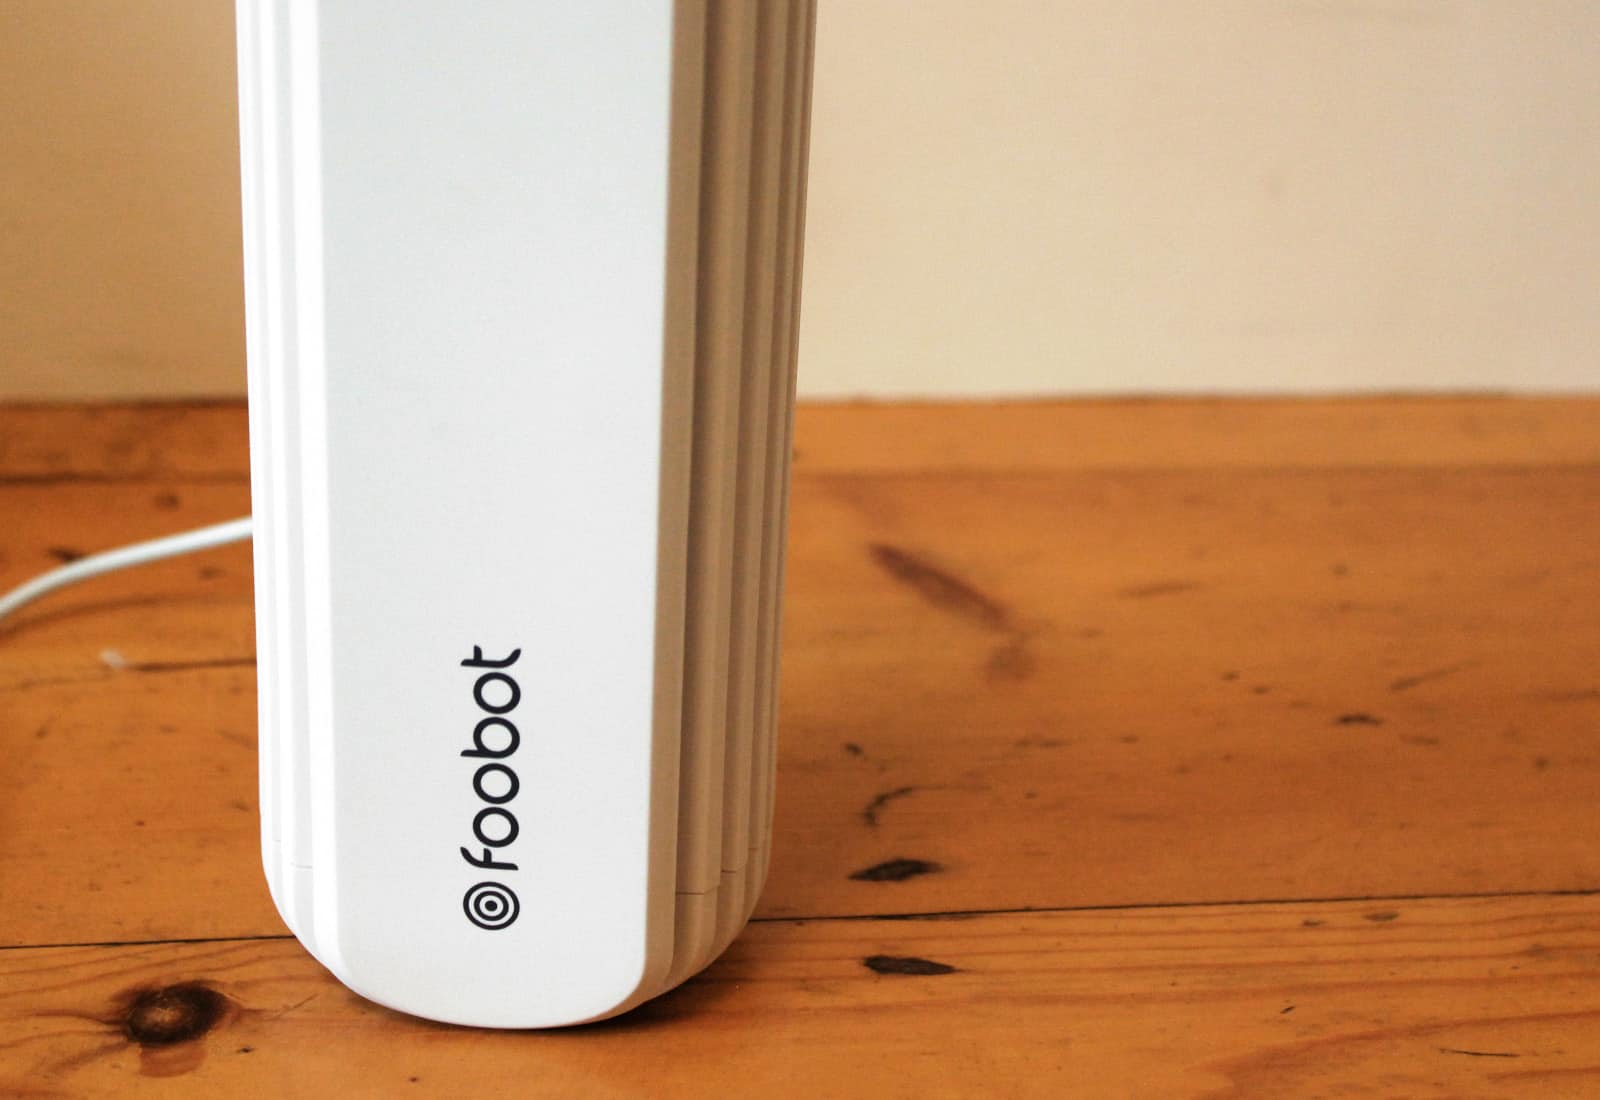 Foobot review: The unobtrusive Foobot stands less than 7 inches high.